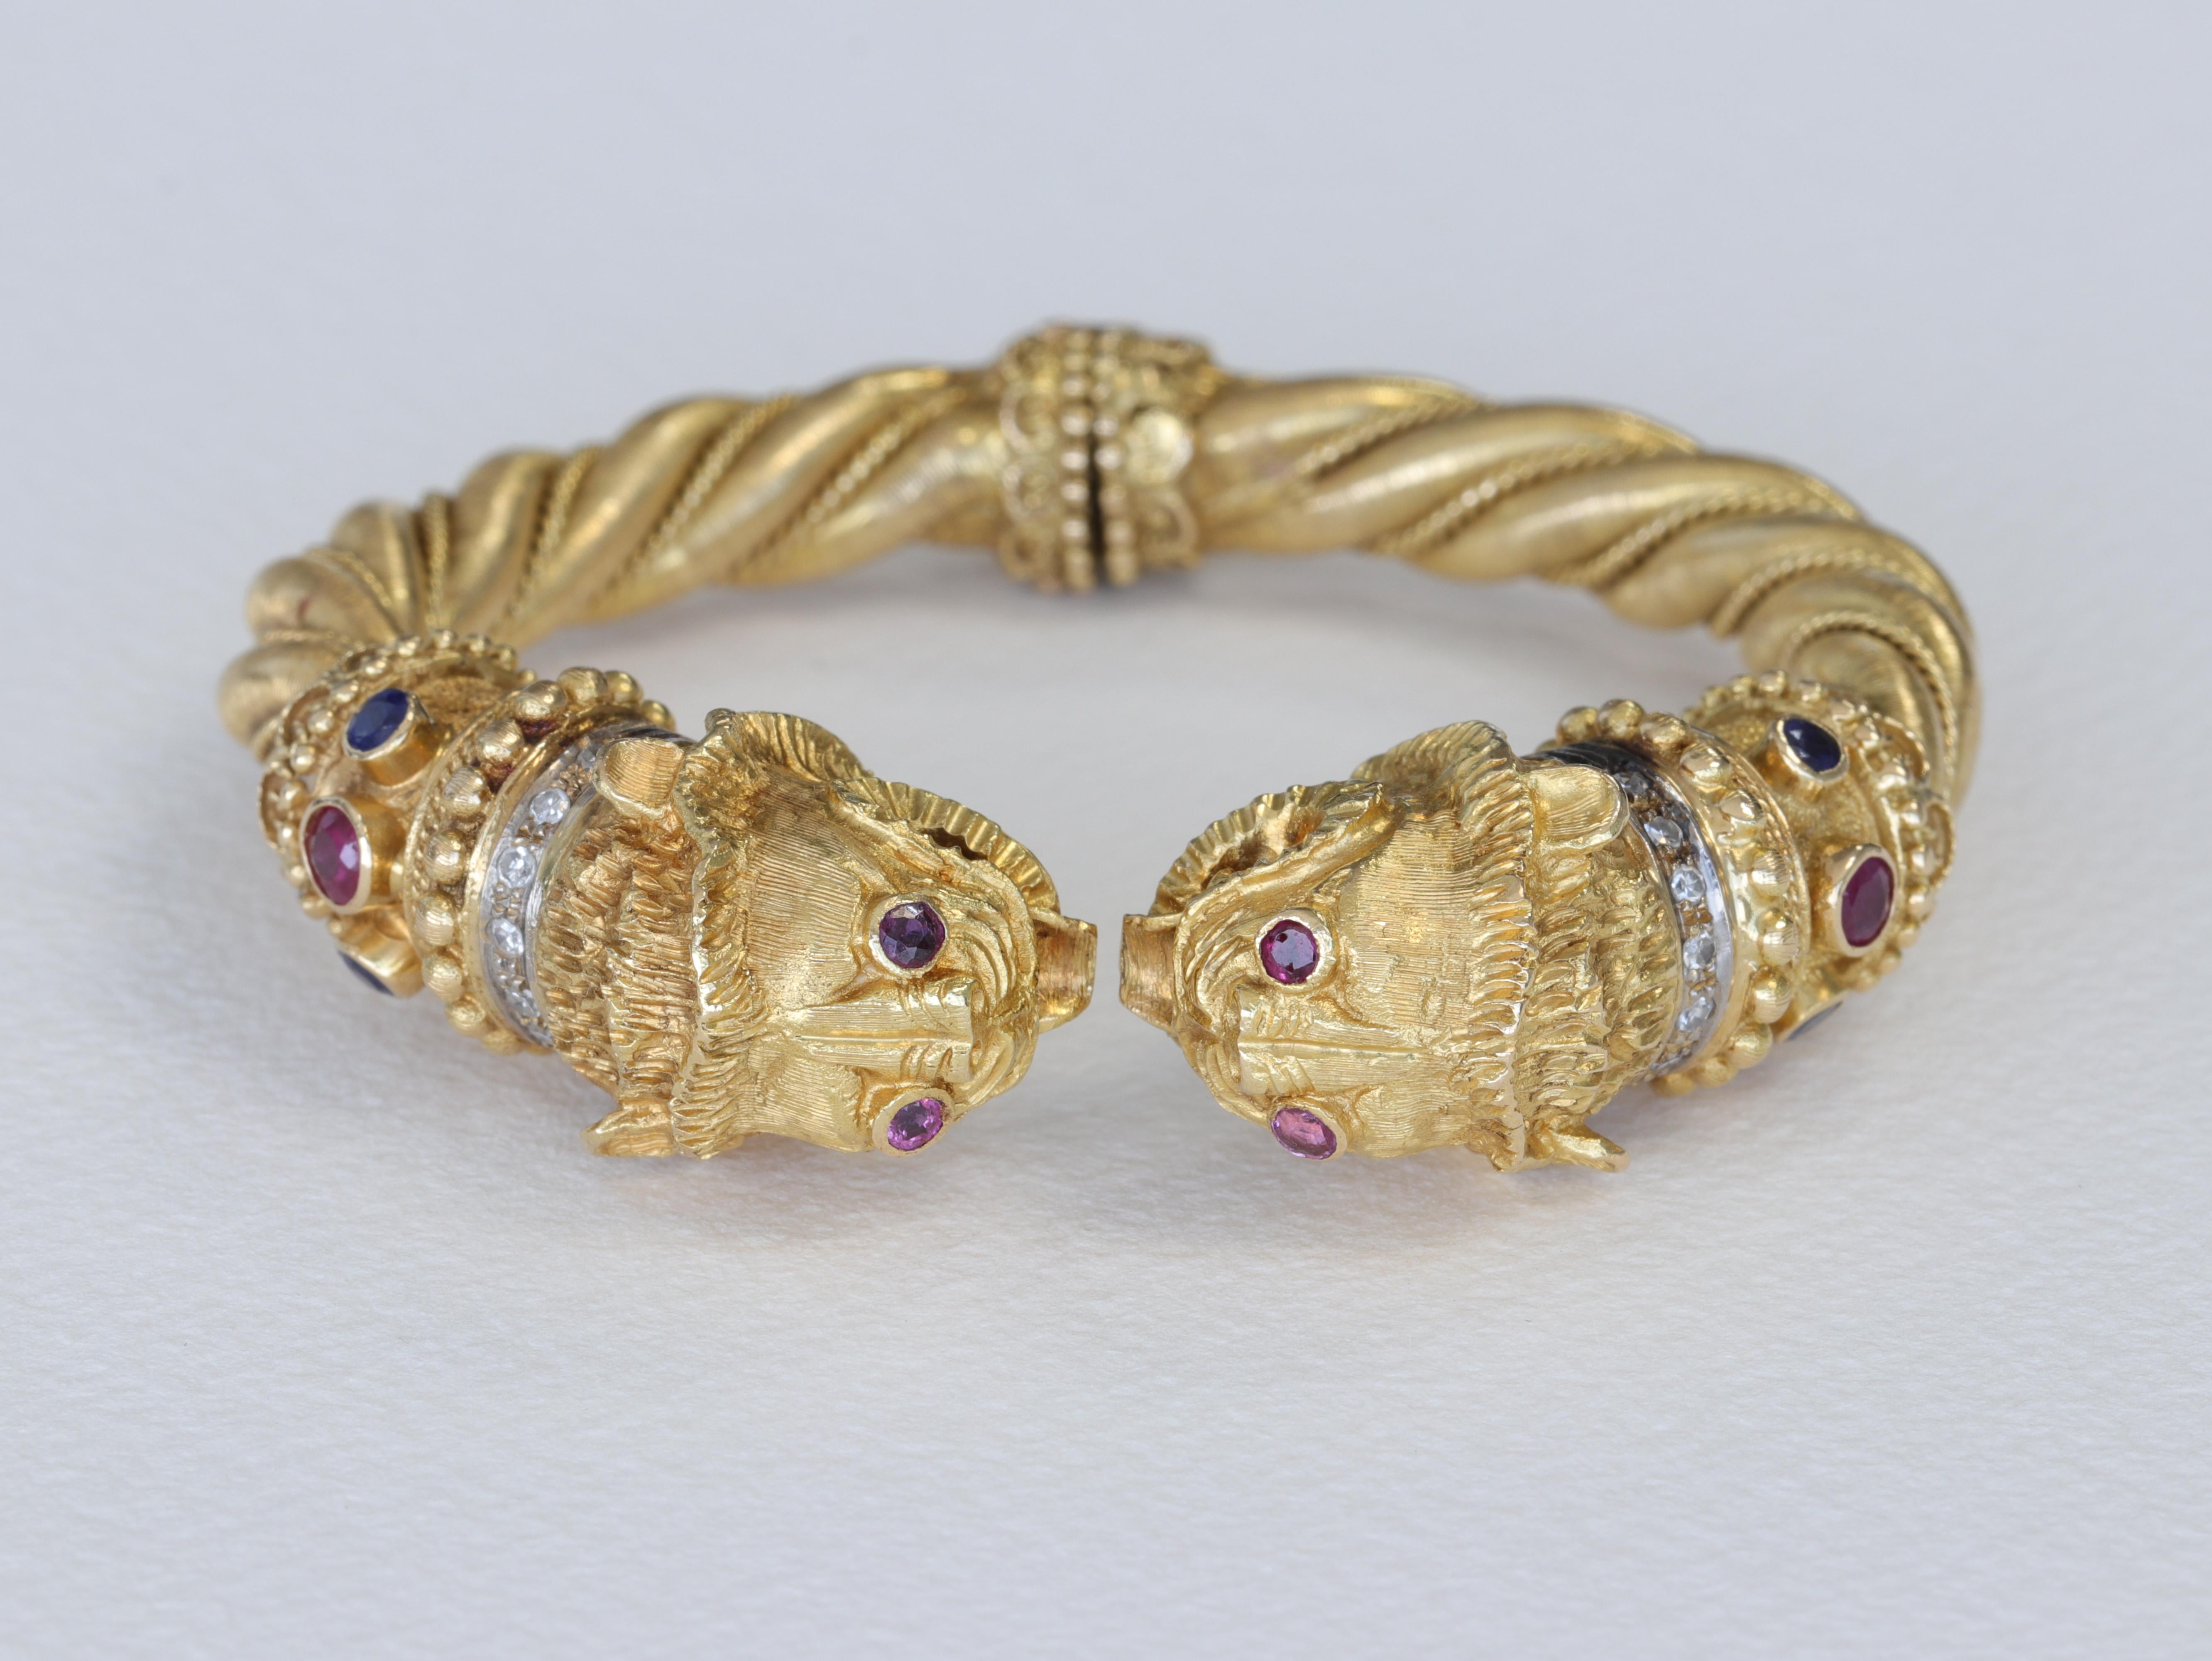 Ilias Lalaounis Chimera Bangle Bracelet in Yellow Gold, Ruby, Diamond & Sapphire In Good Condition For Sale In Tampa, FL